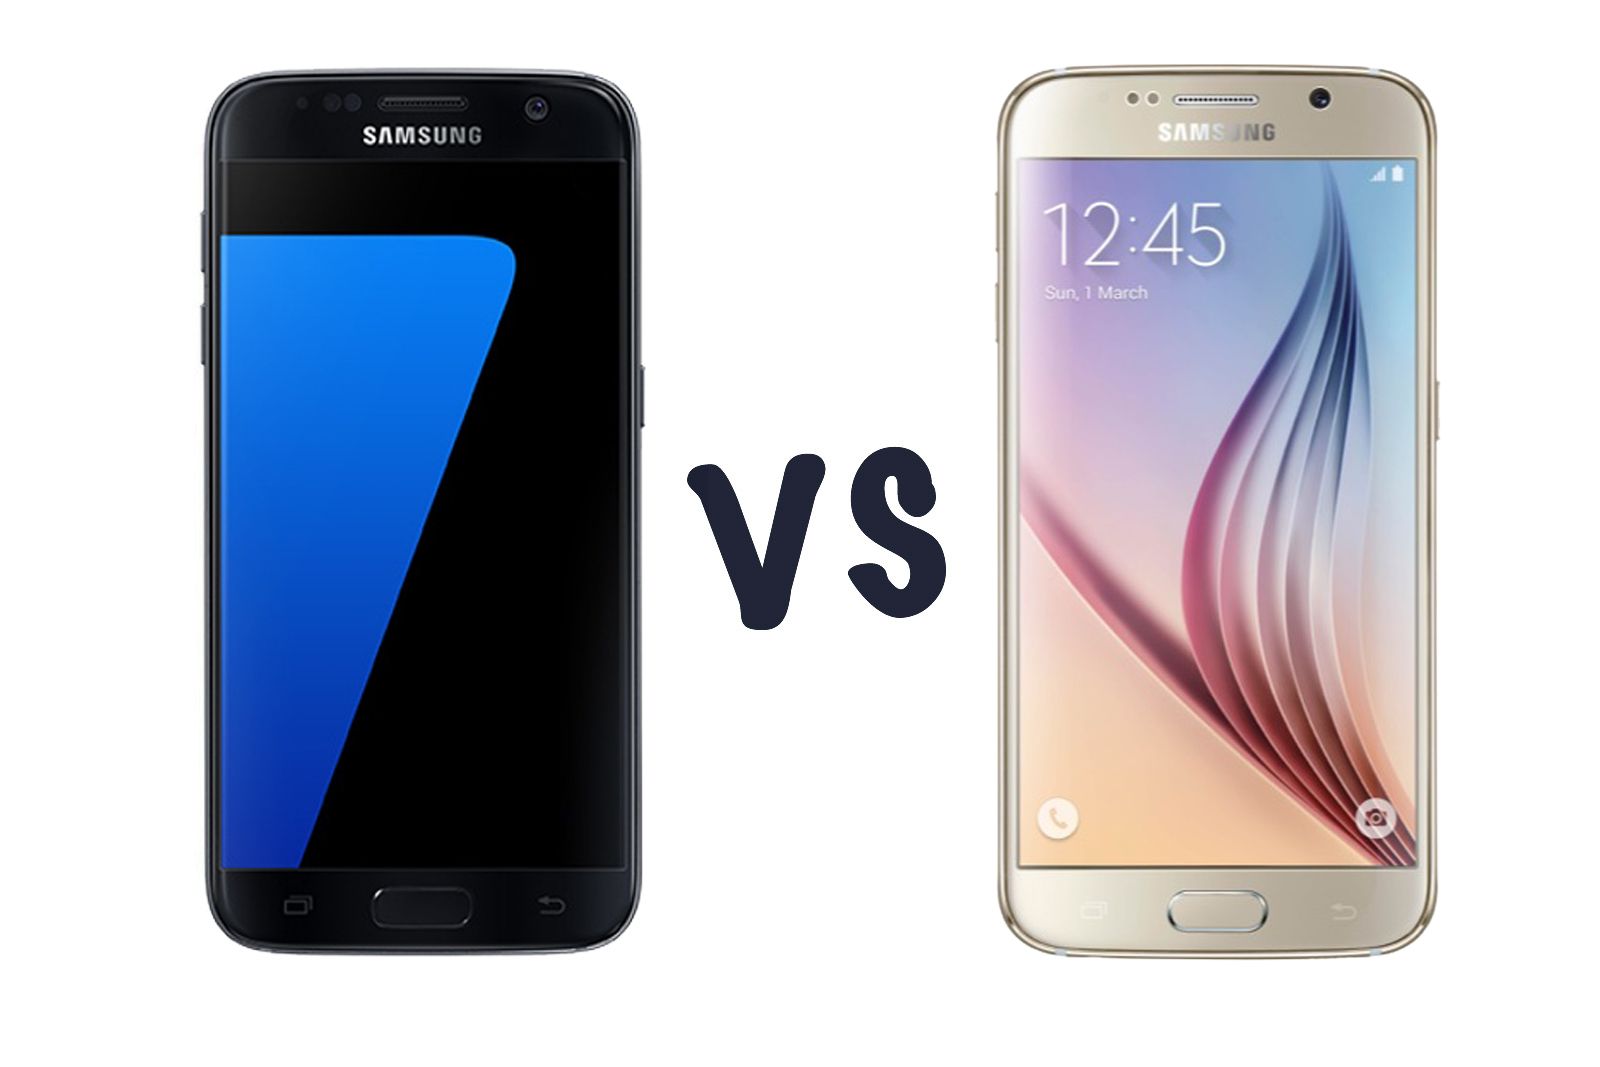 samsung galaxy s7 vs galaxy s6 should you upgrade to samsung s new flagship  image 1